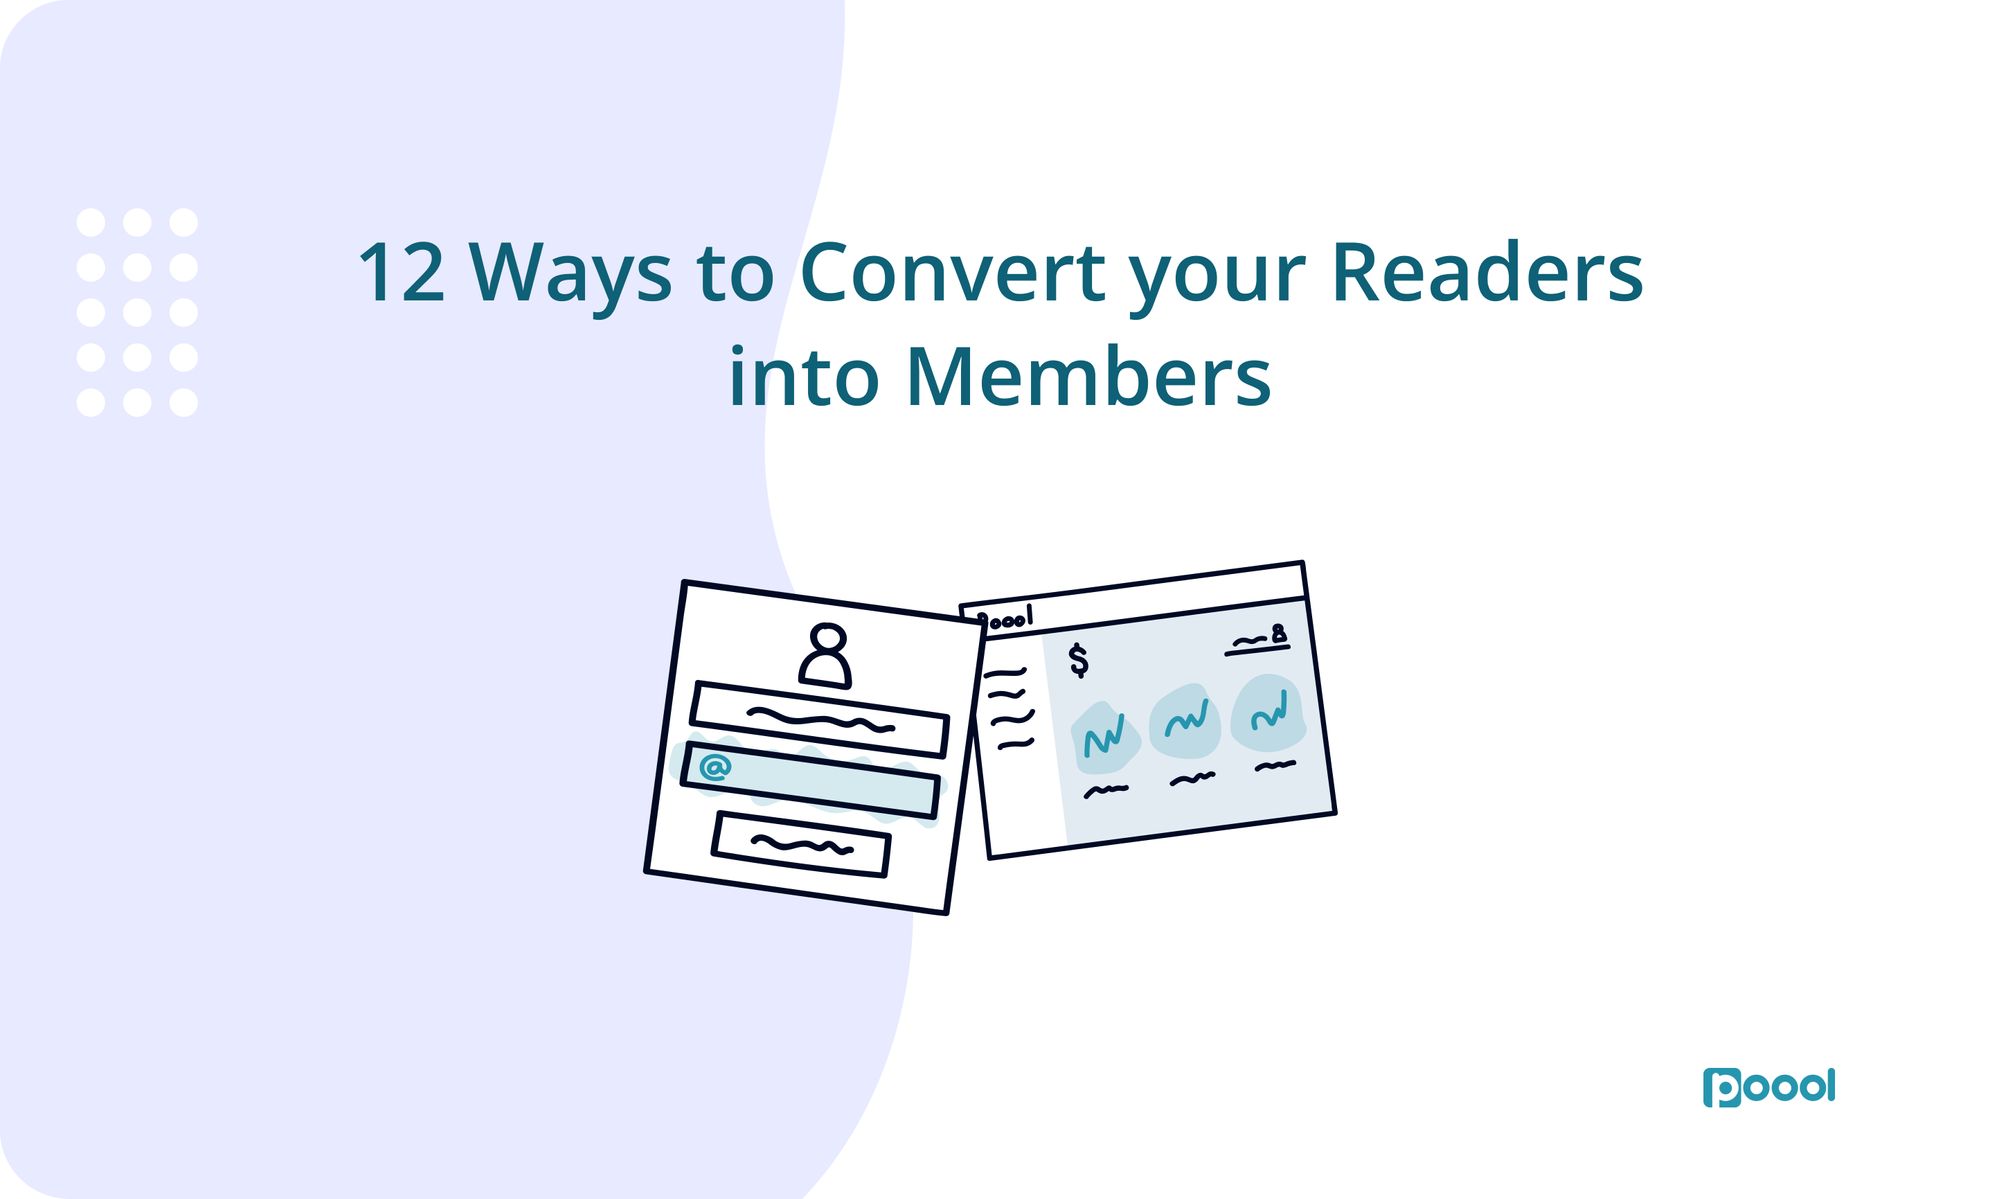 12 Ways to Convert your Readers into Members.